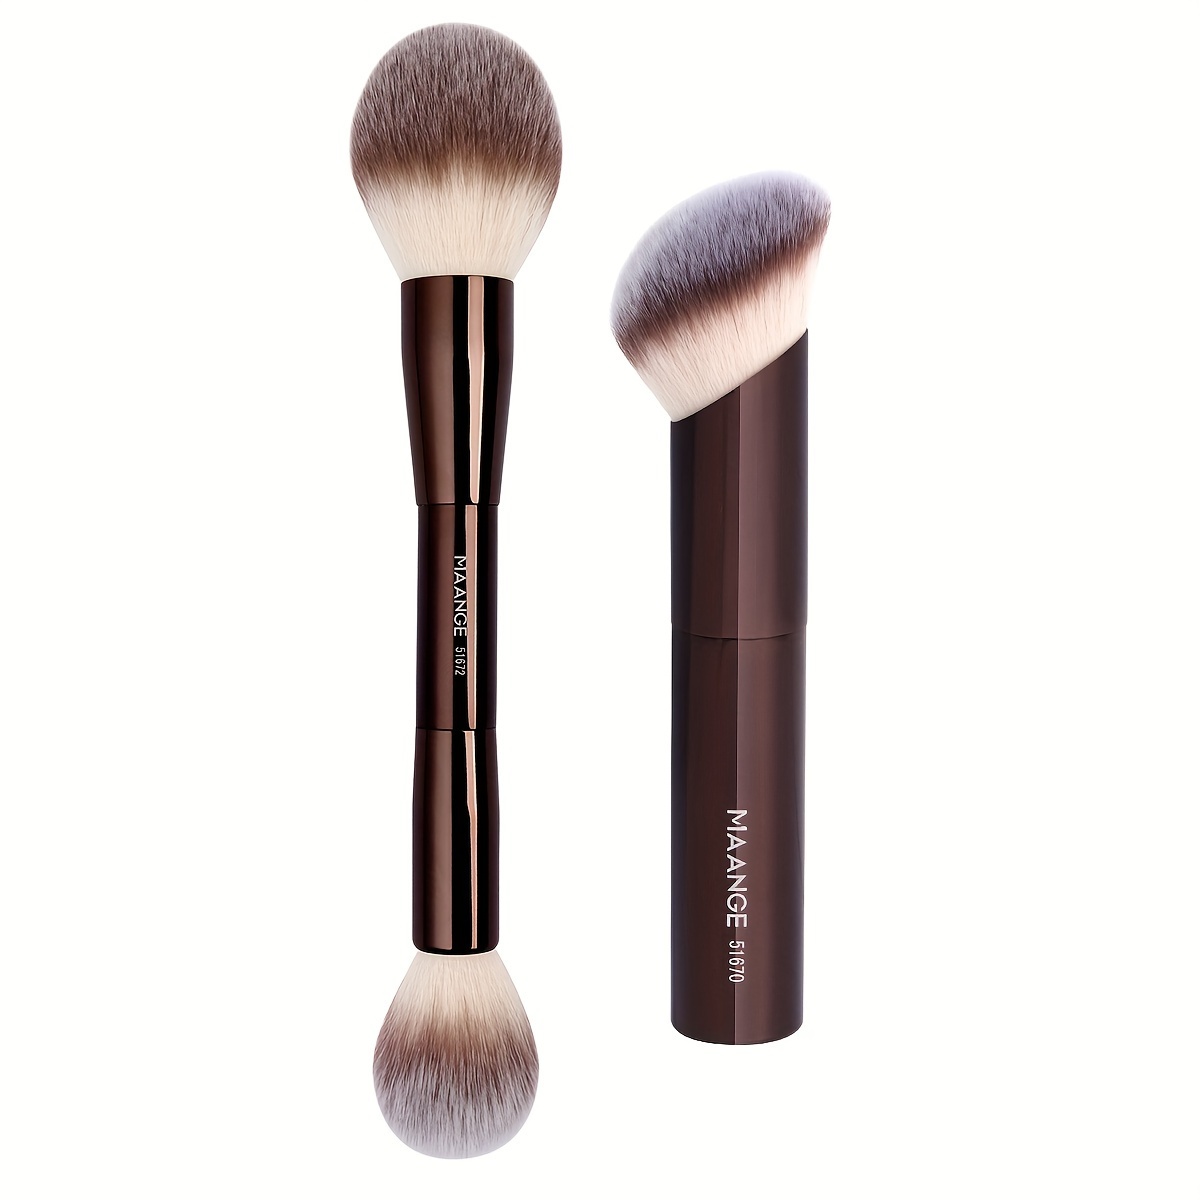 

Maange 2-piece Foundation Brush Set - Soft Nylon Bristles, Round & Angled For Contouring, Tanning & Blending - Perfect For Beginners, Travel-friendly Makeup Tool